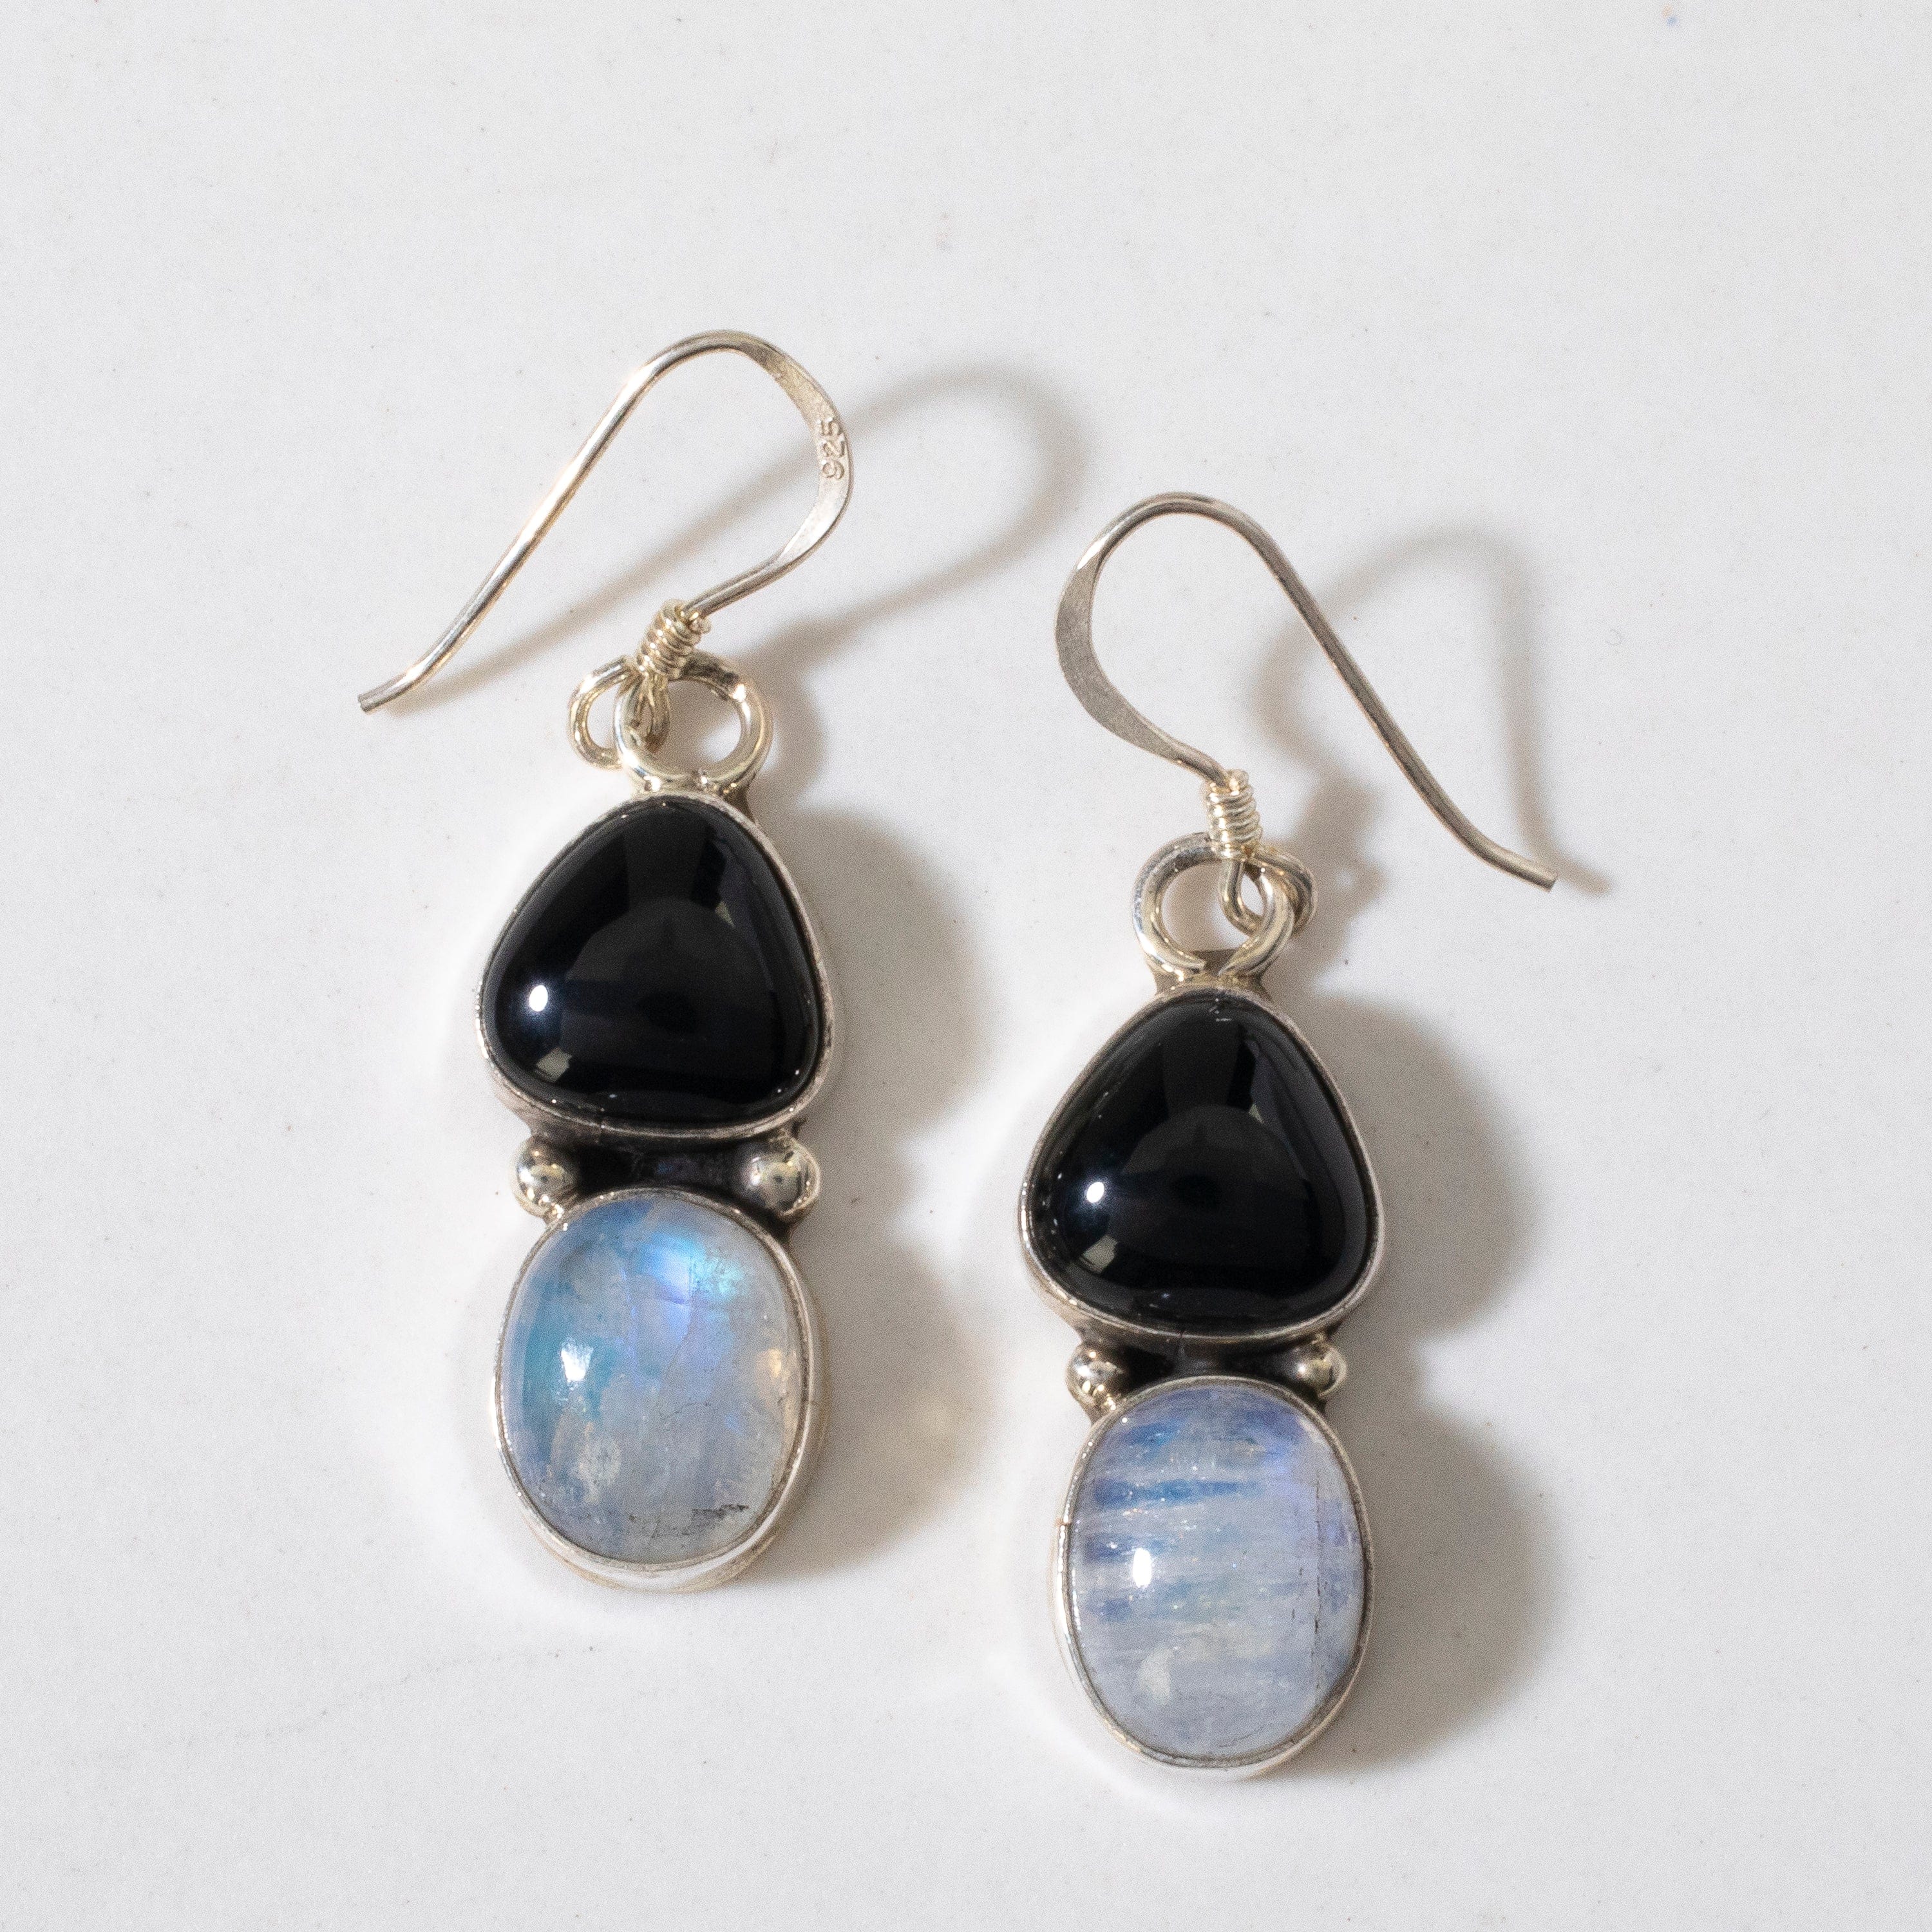 Kalifano Native American Jewelry Moonstone & Black Opal Dangle USA Native American Made 925 Sterling Silver Earrings with French Hook NAE400.043